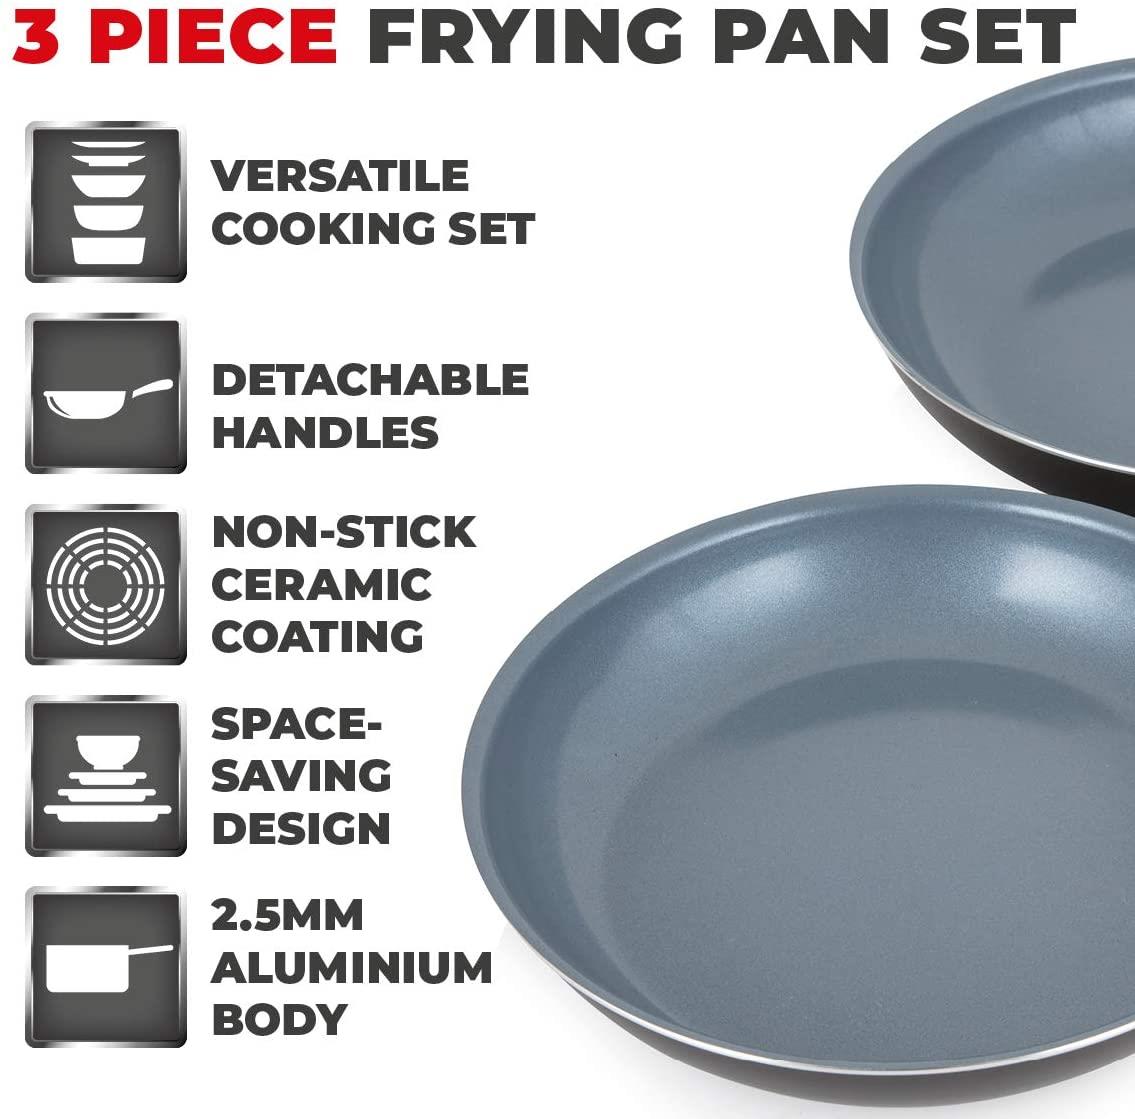 Tower Freedom 3 Piece 26/30cm Cookware Set with Ceramic Coating- T800202